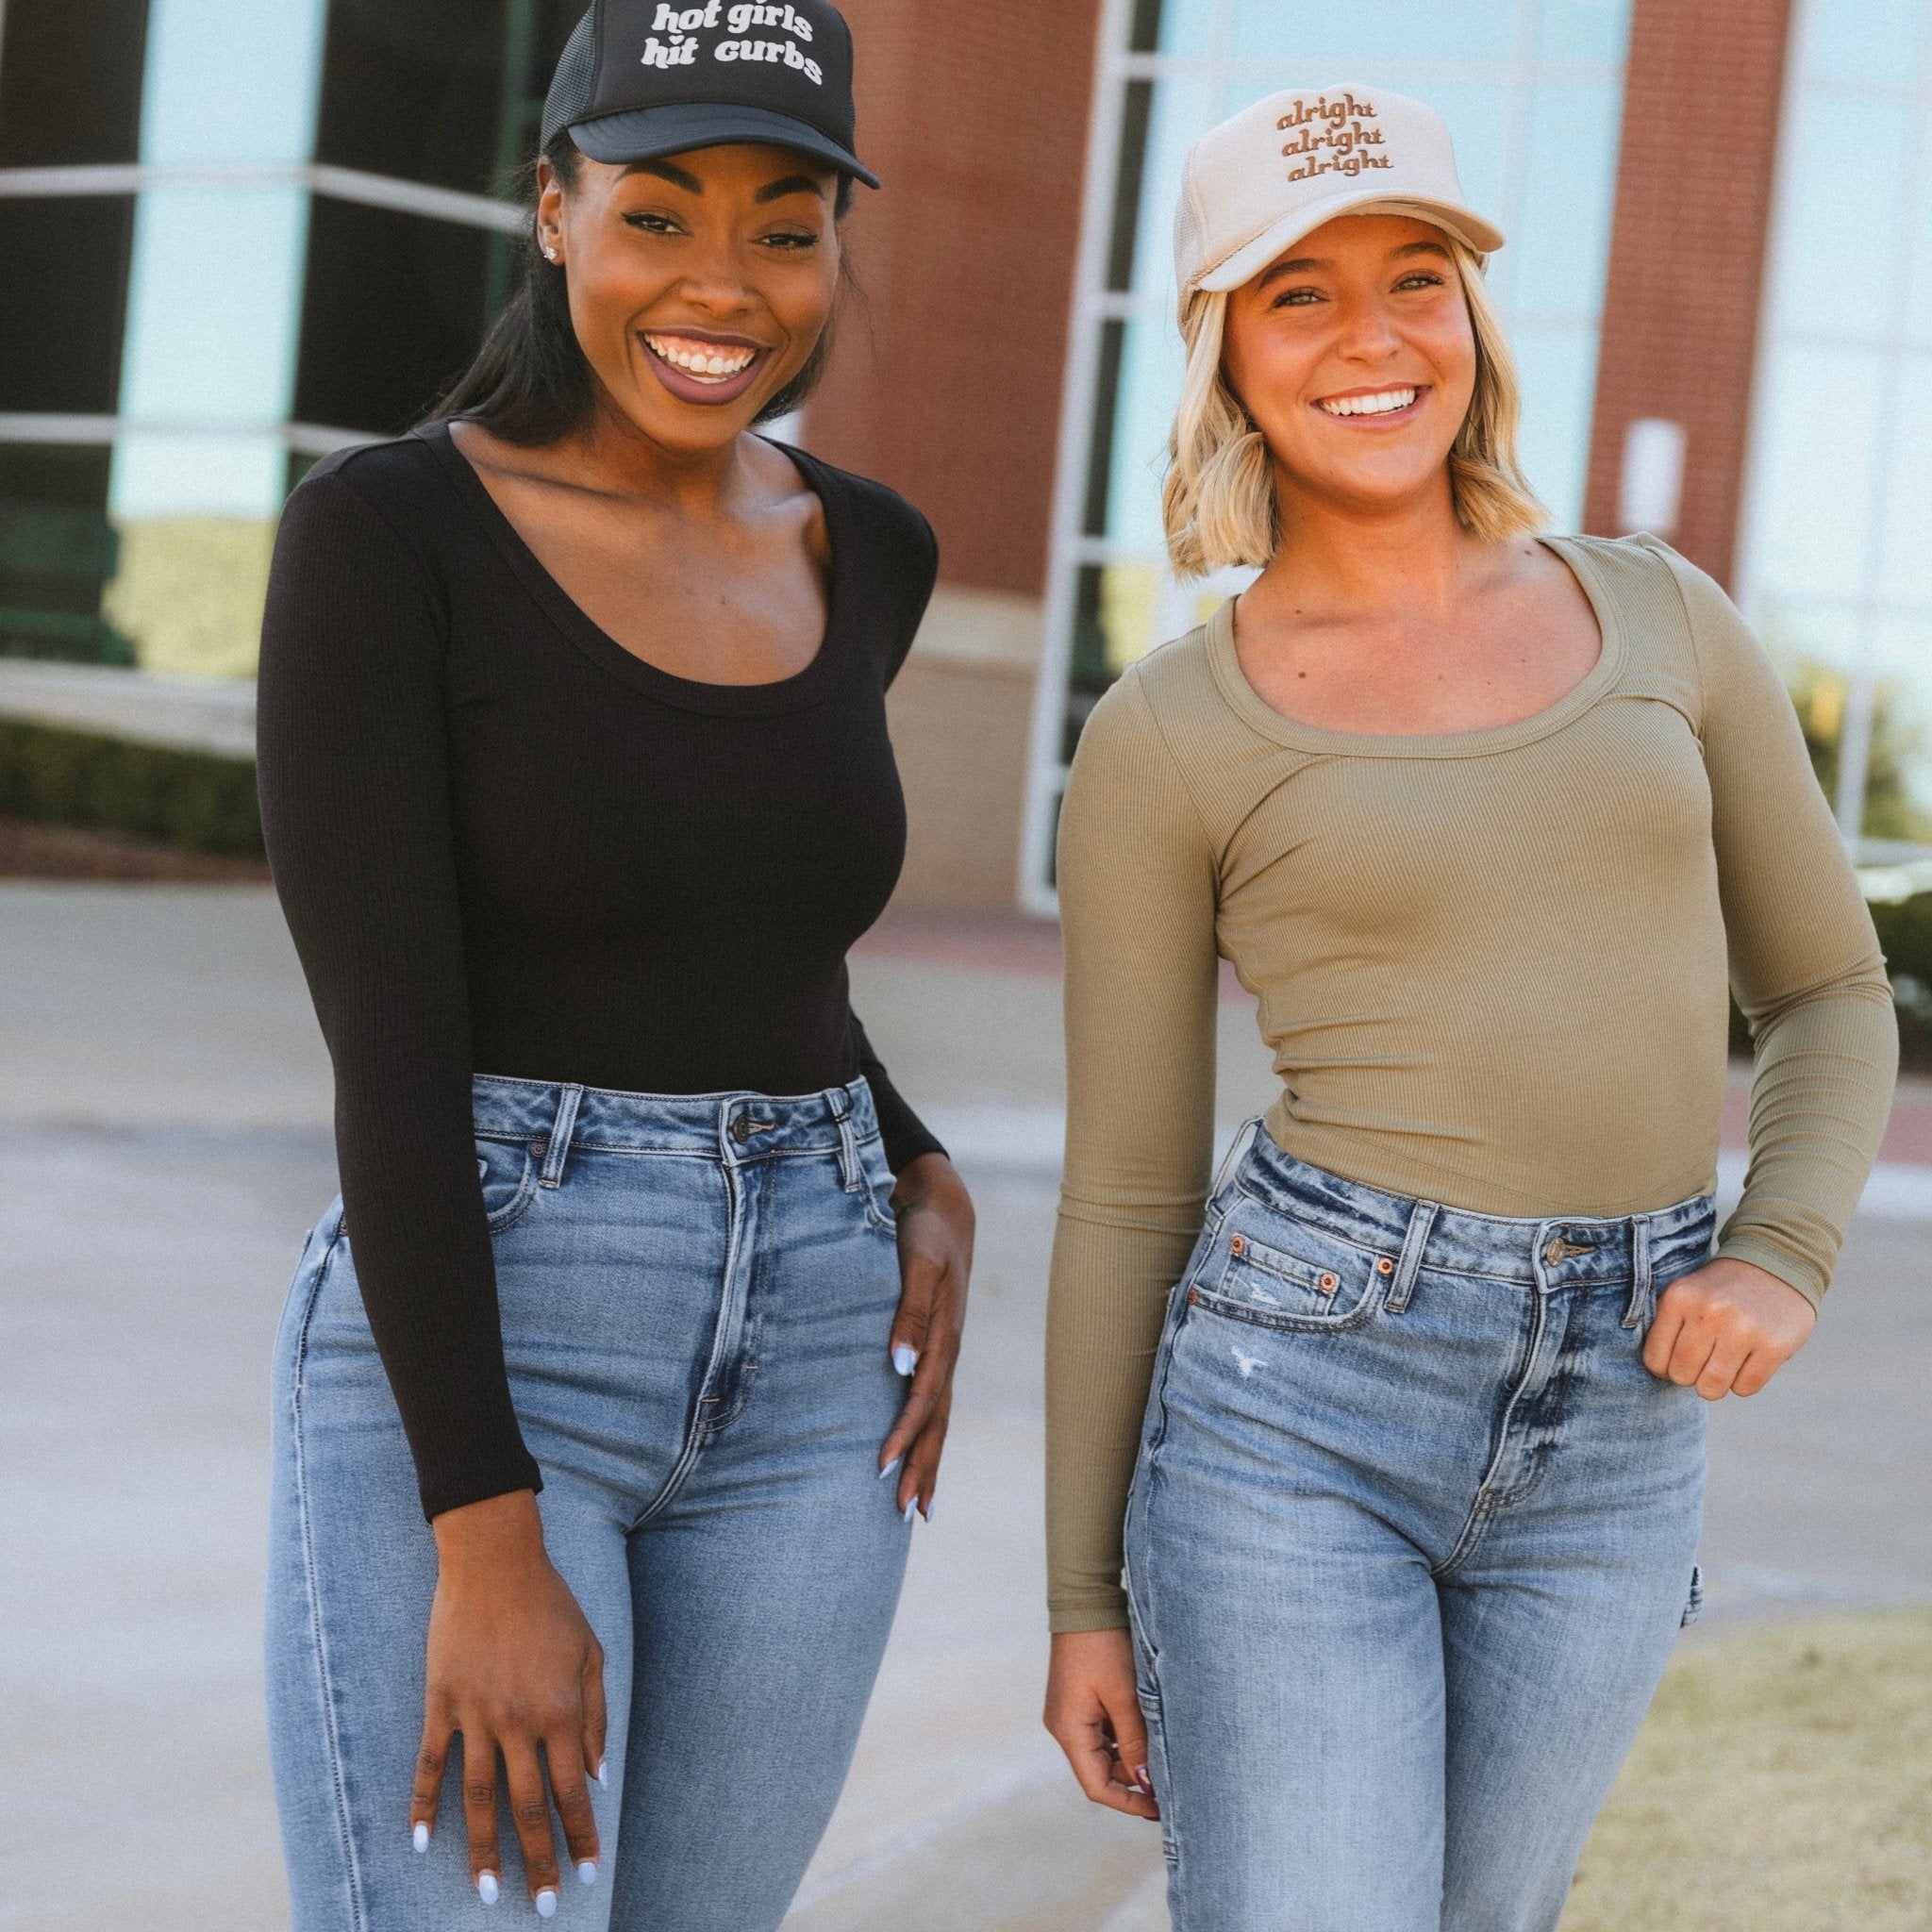 Trucker hats and basic long sleeve bodysuits on two models from Lush Fashion Lounge boutique in Oklahoma City